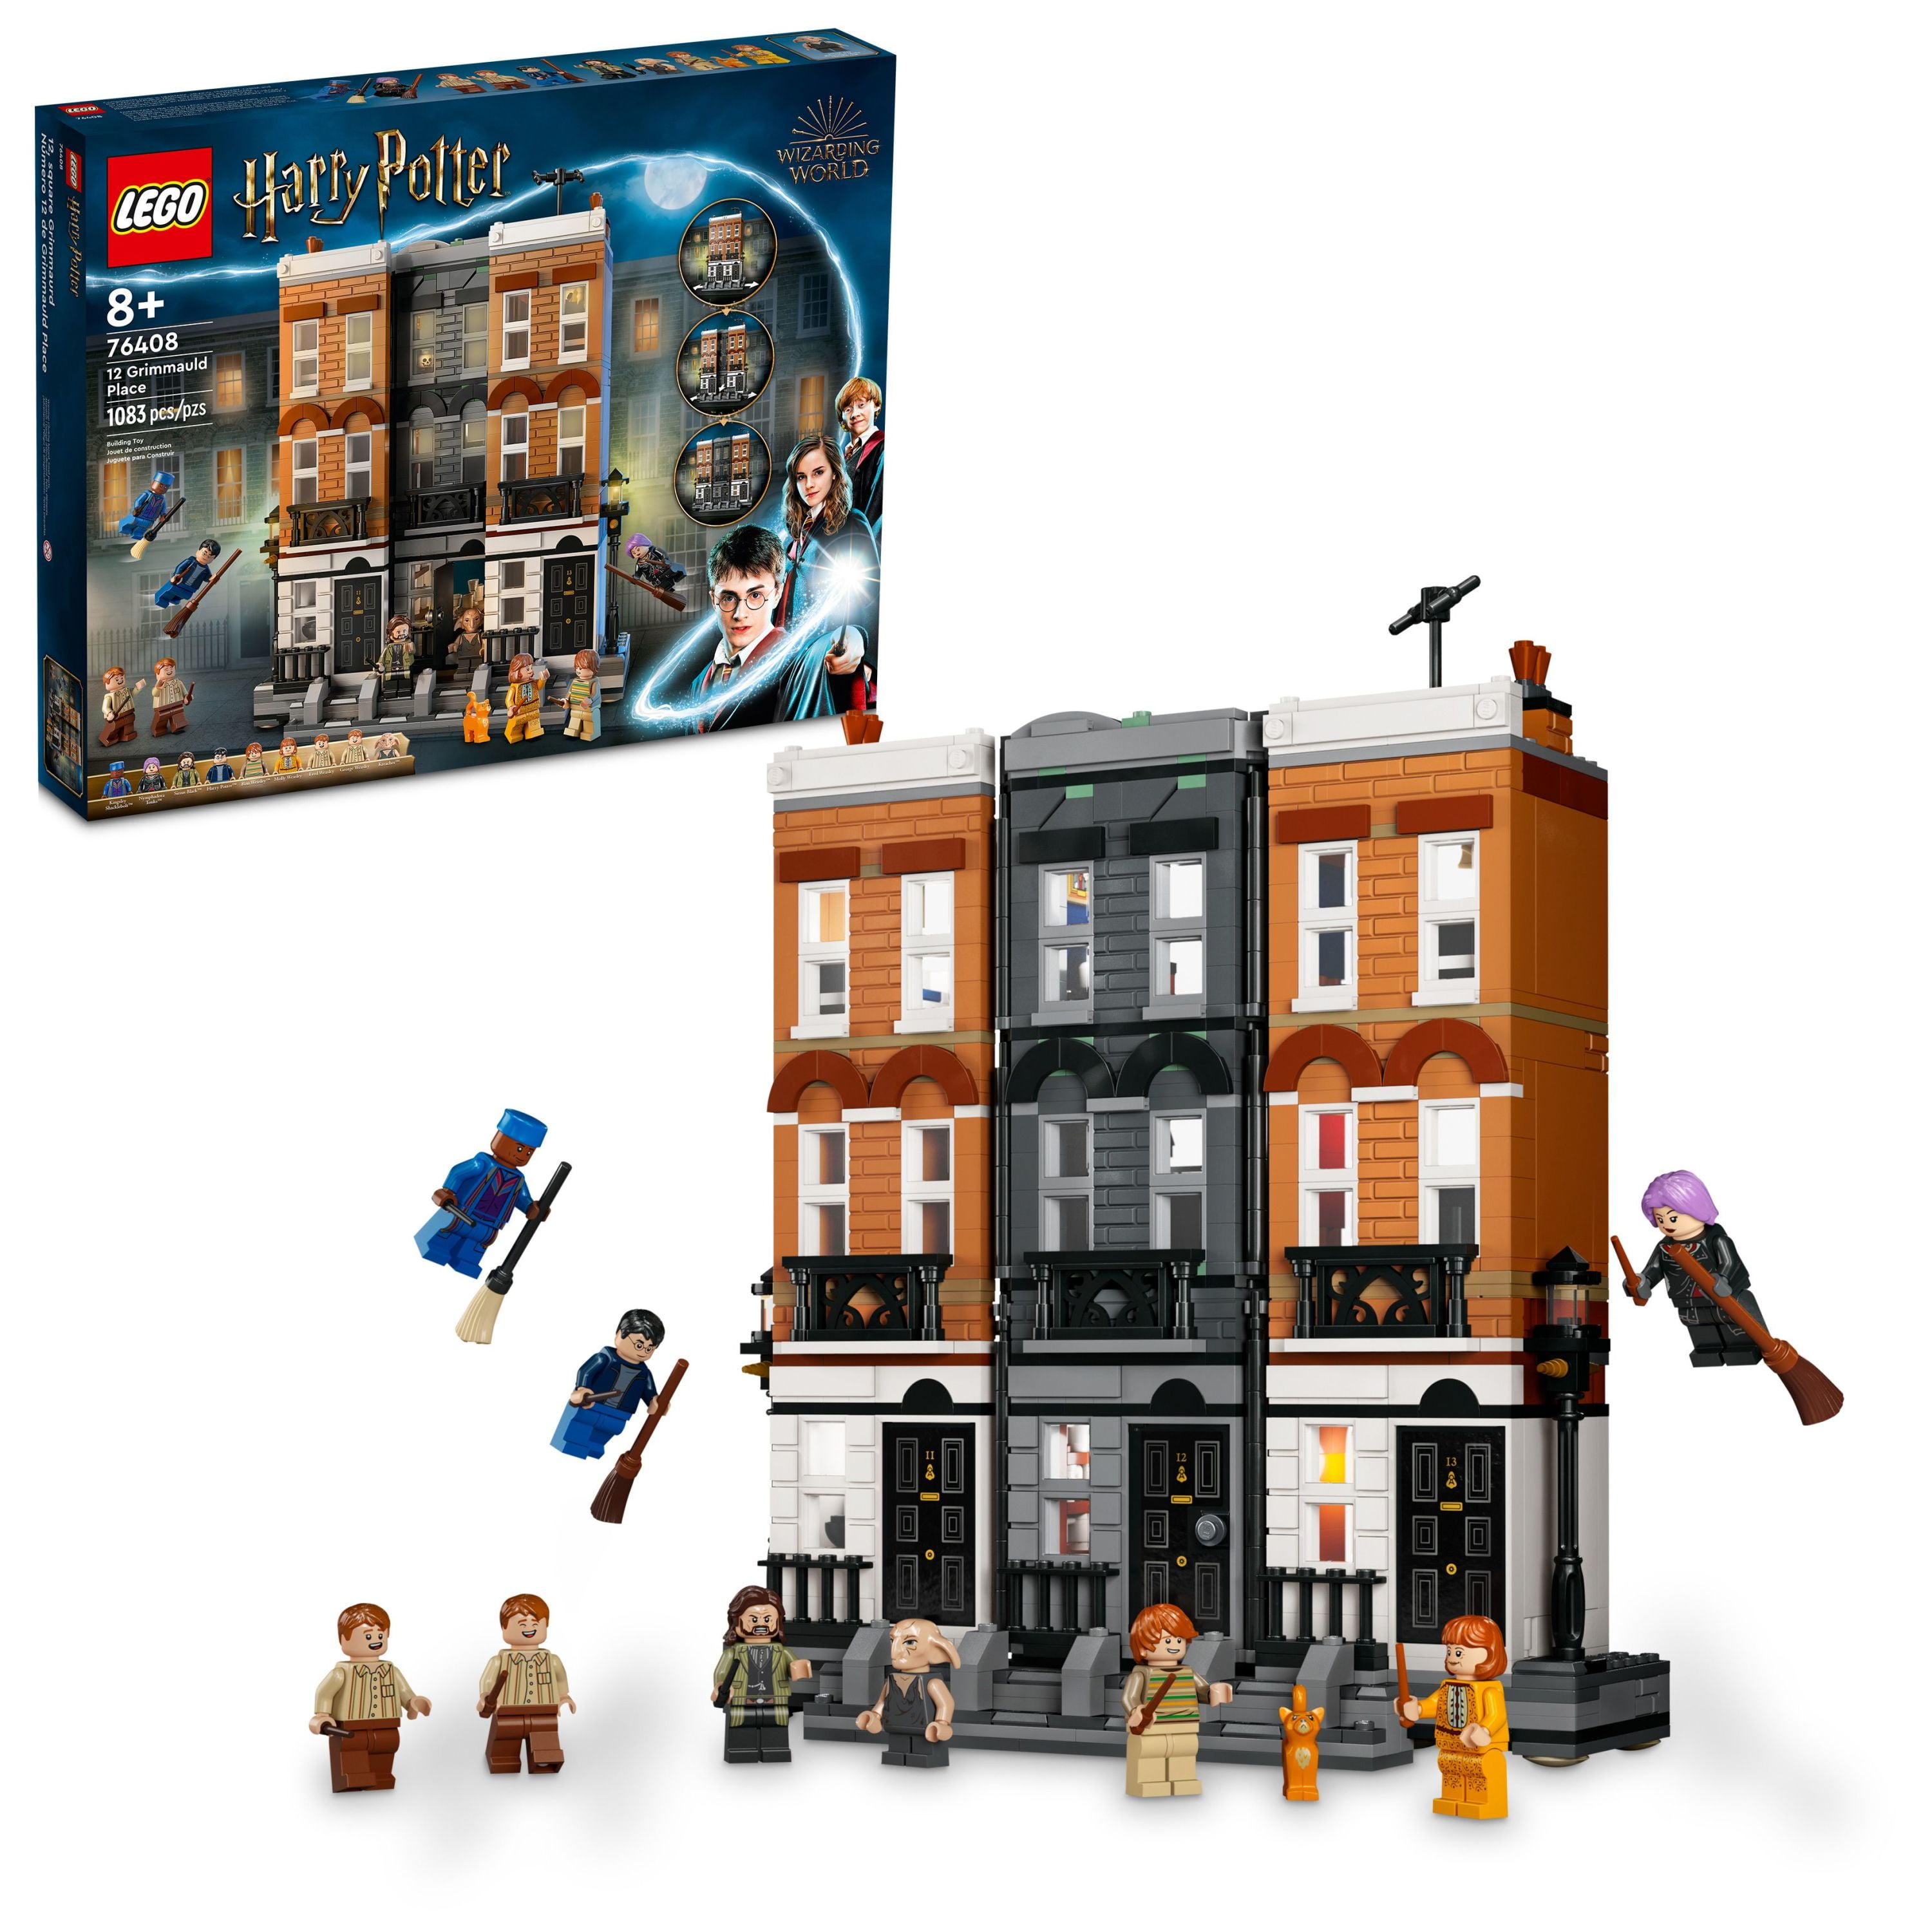 LEGO Harry Potter 12 Grimmauld Place 76408, Headquarters of the Order of the Phoenix Magic Set, Transforming House Model Building with 9 Minifigures including Sirius Black, Kreacher, and the Weasleys